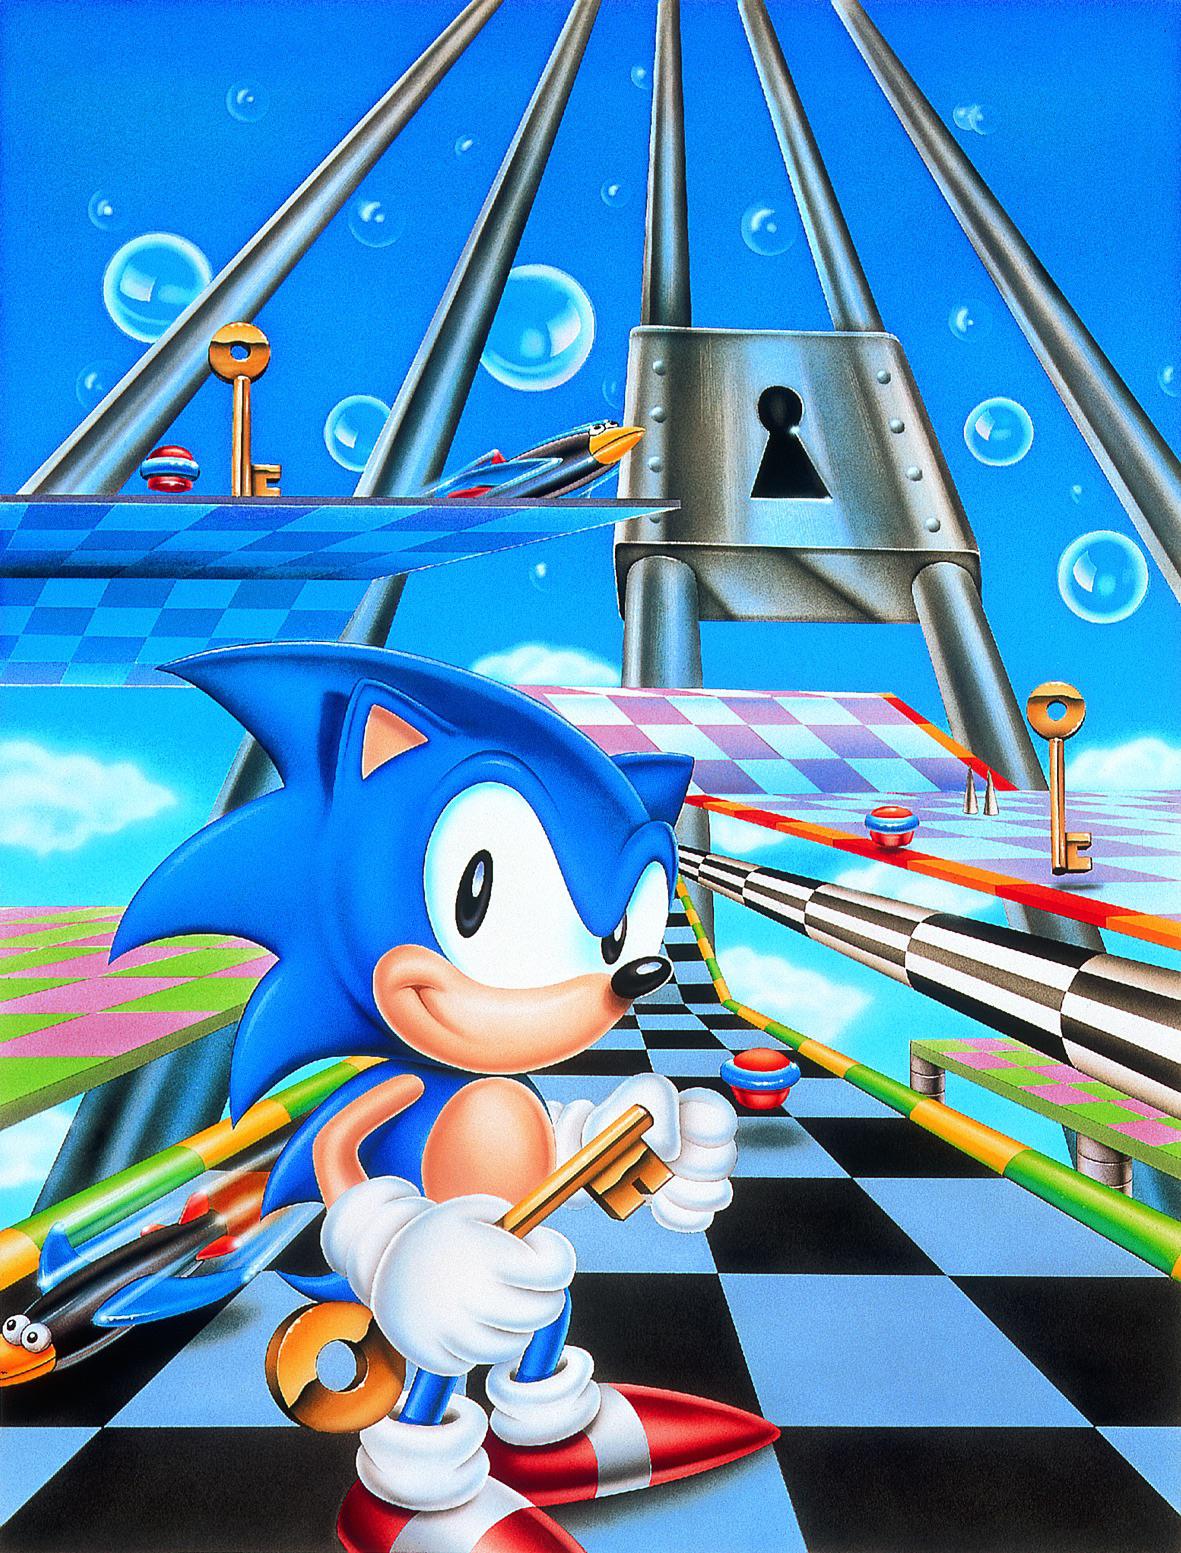 Sonic Labyrinth(1995) box art fits the aesthetic